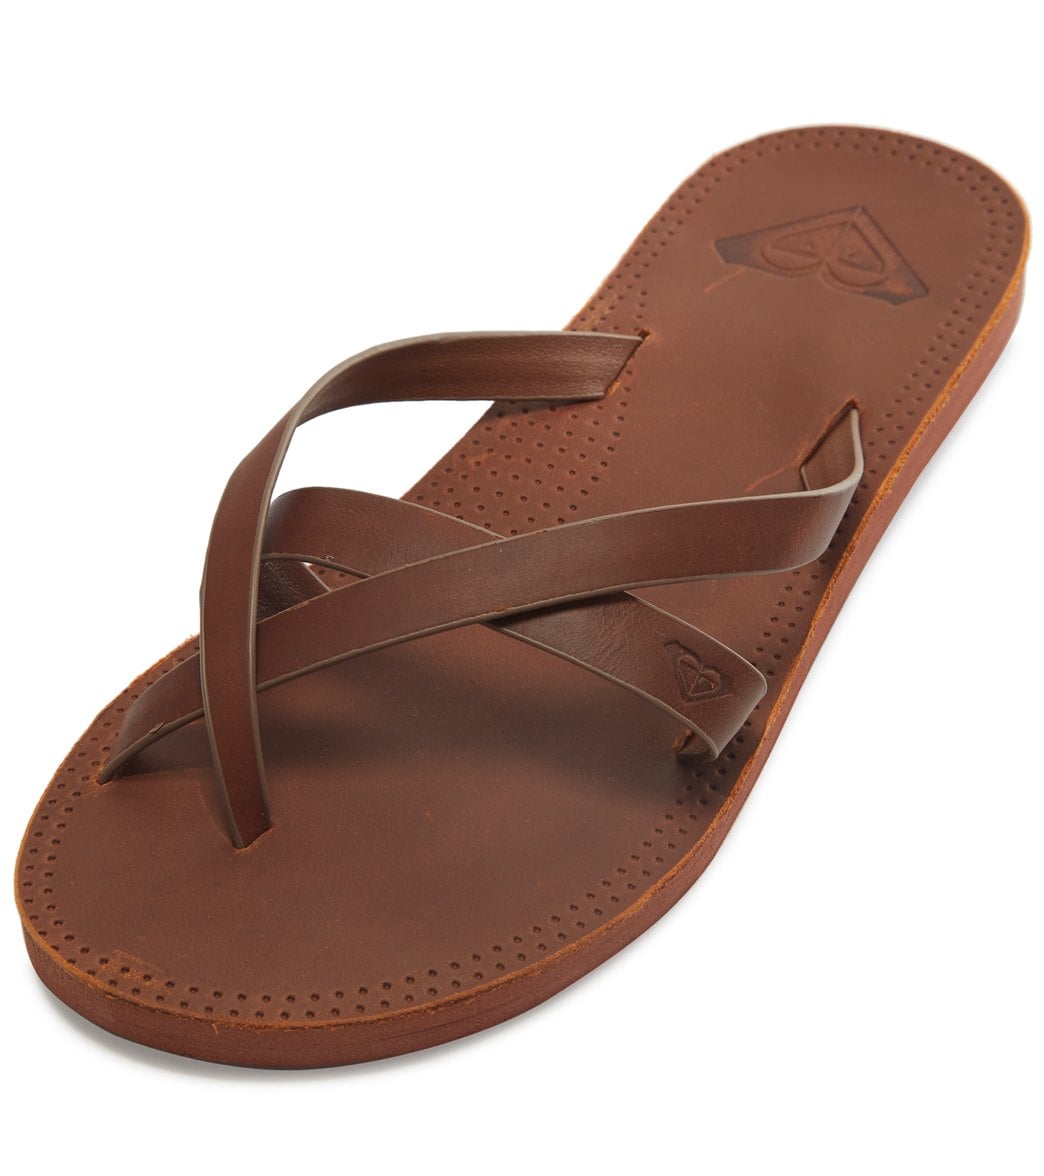 Roxy Gemma Leather Sandals at SwimOutlet.com